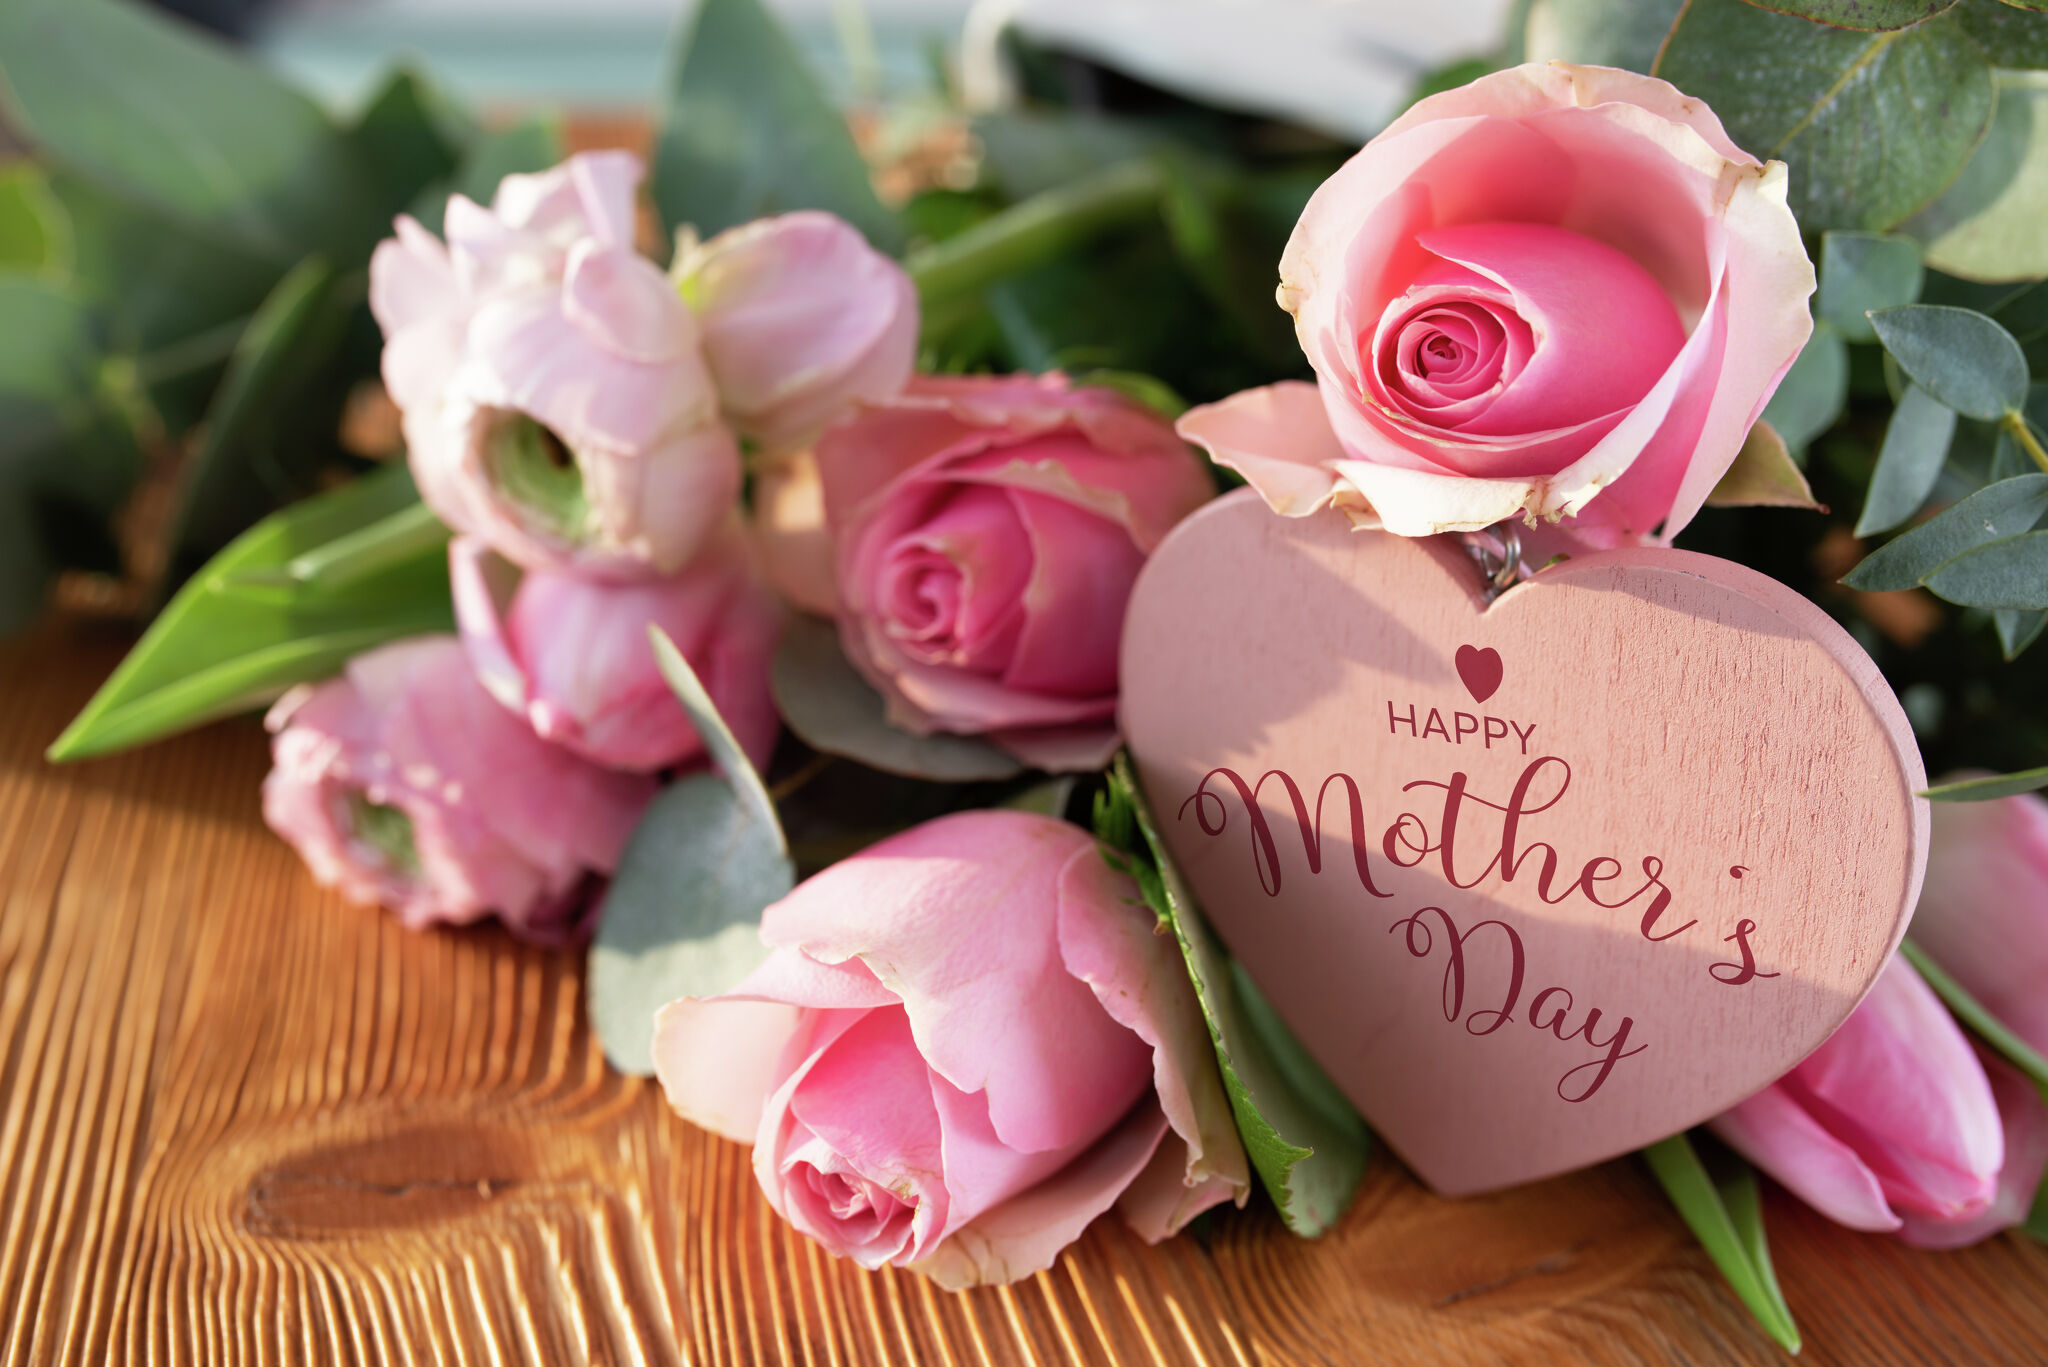 You are currently viewing Blooms of Love: Showering Mom with Affection Through Thoughtful Mother’s Day Flowers